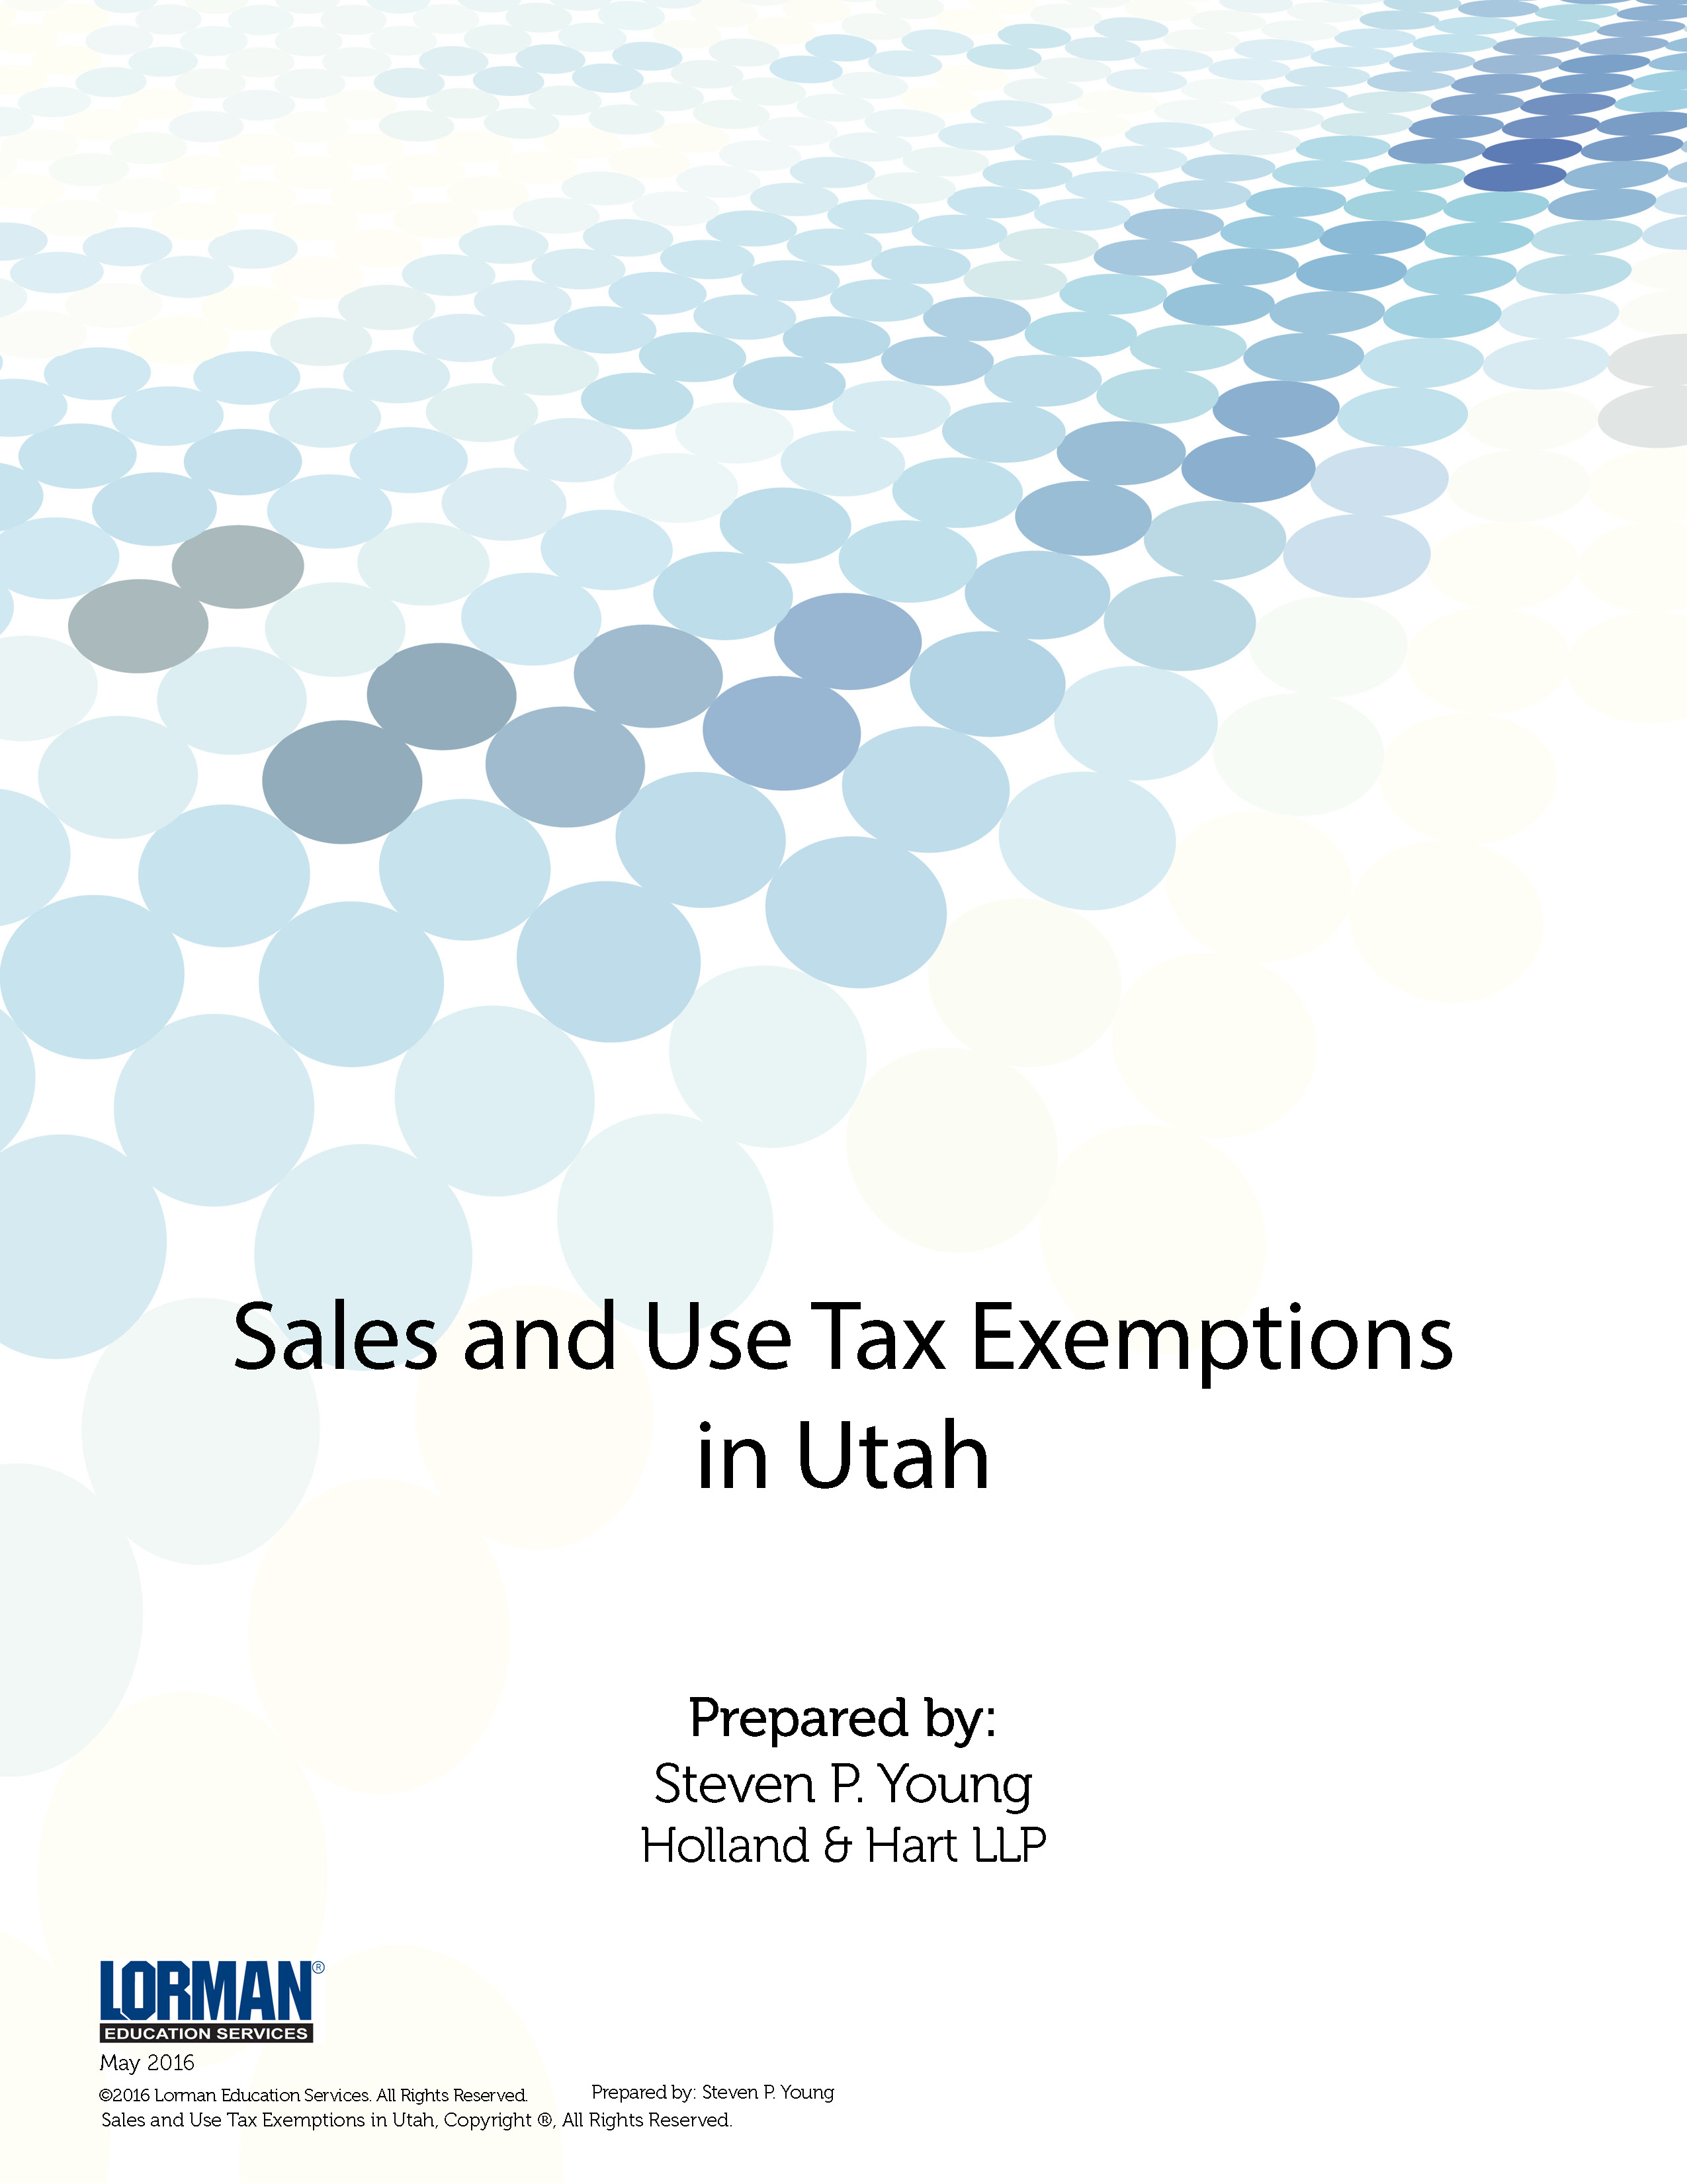 Sales and Use Tax Exemptions in Utah